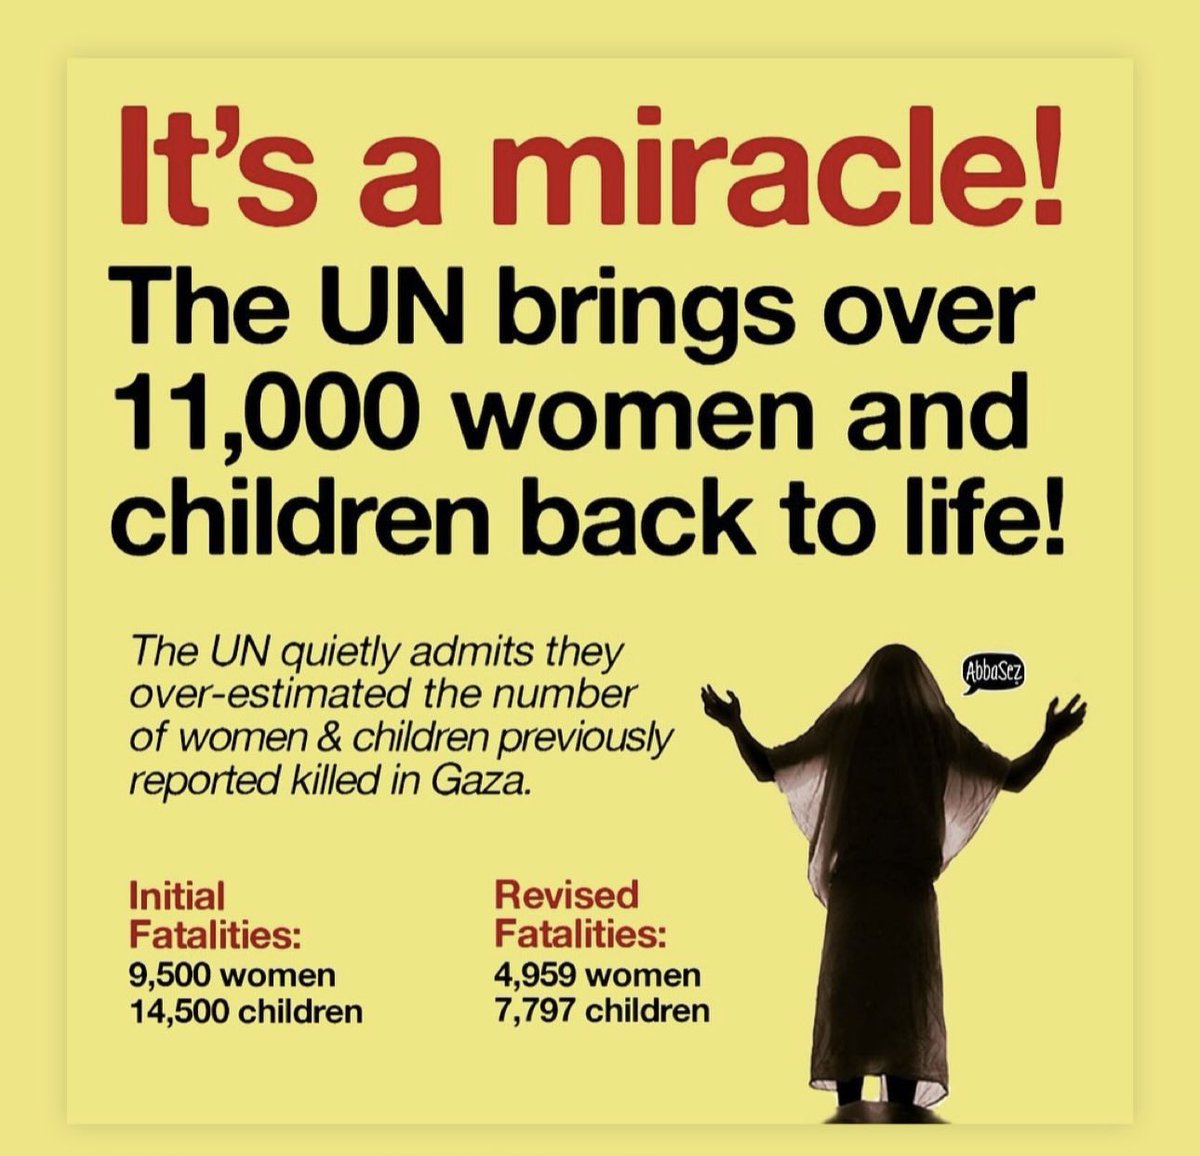 It’s a miracle! Or the UN is a rotten, lying, terror sympathizing, Jew hating, worthless organization that should have been shut down the day after the state of Israel was established. That was about the only good thing this organization did since its inception. And now let